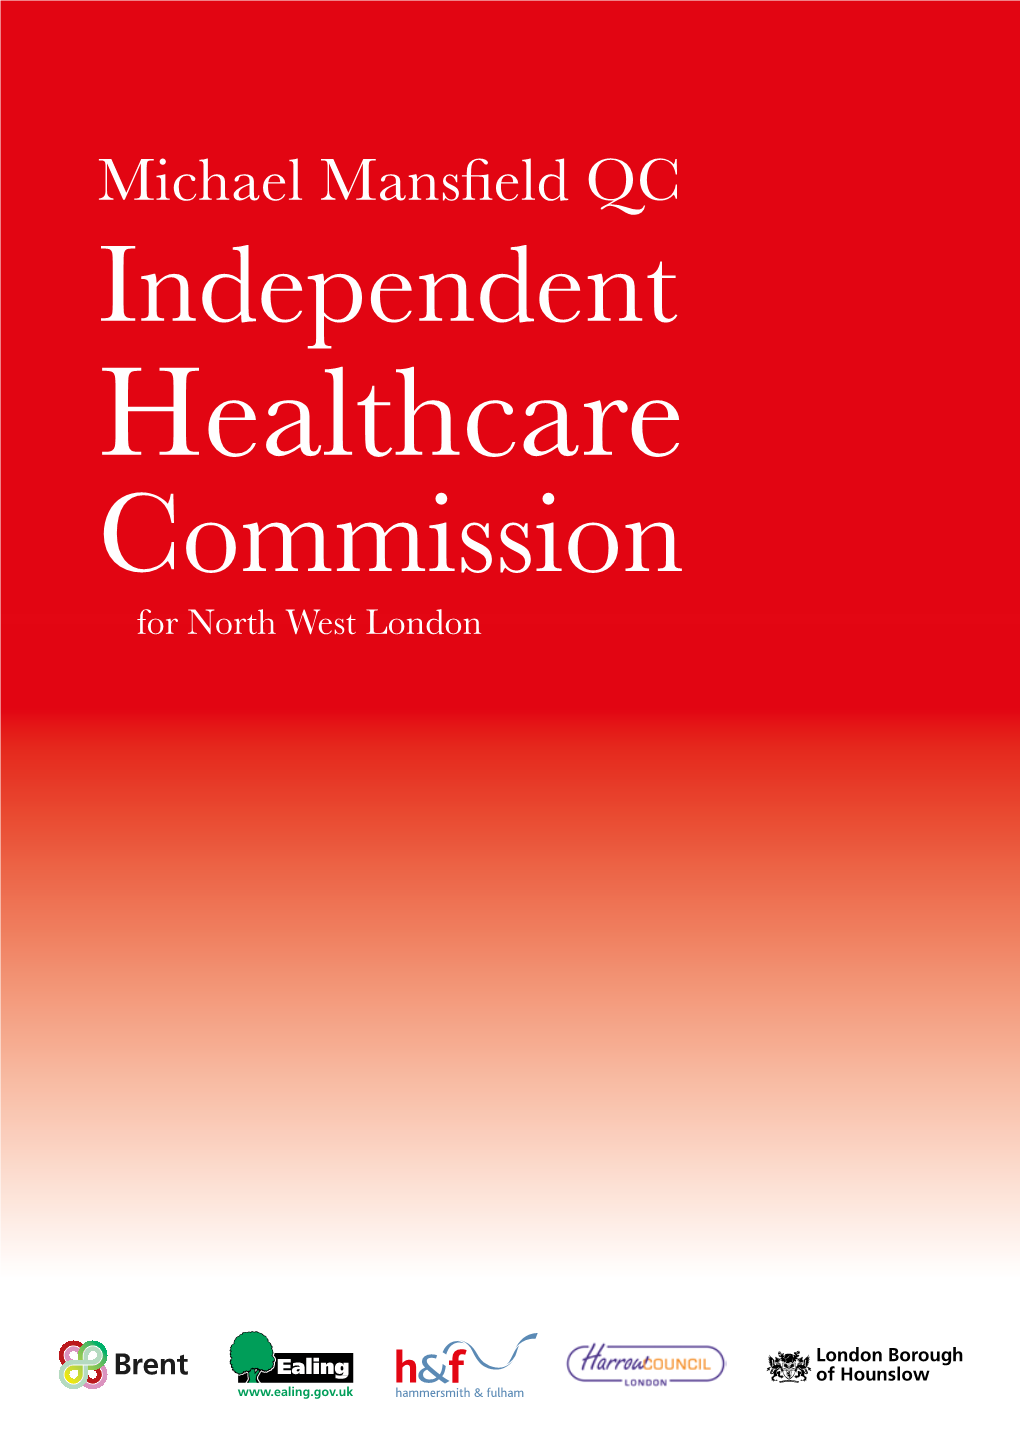 Read the Independent Healthcare